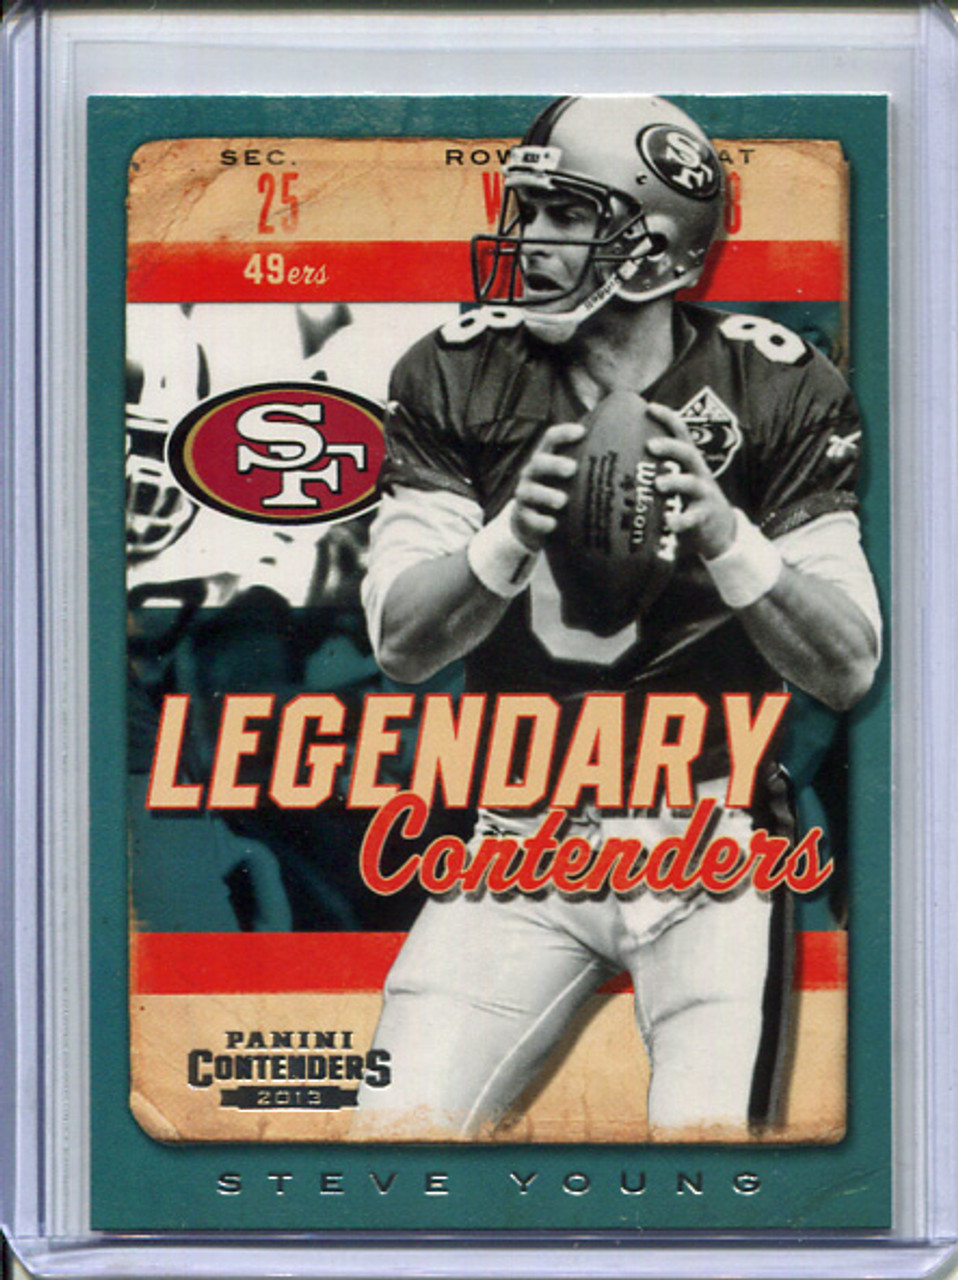 Steve Young 2013 Contenders, Legendary Contenders #9